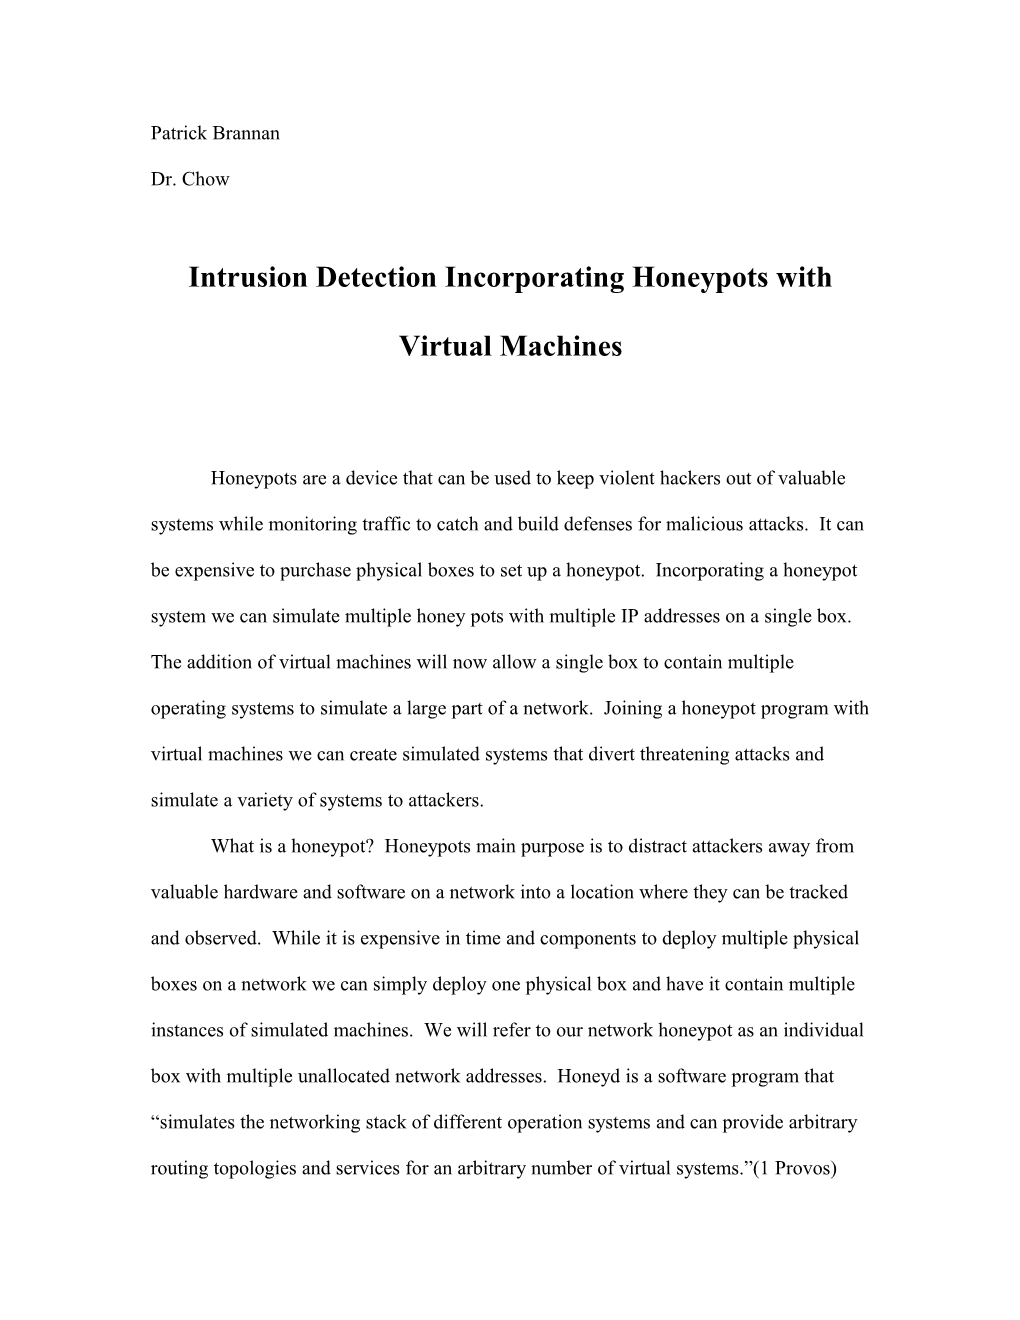 Intrusion Detection Incorporating Honeypots with Virtual Machines